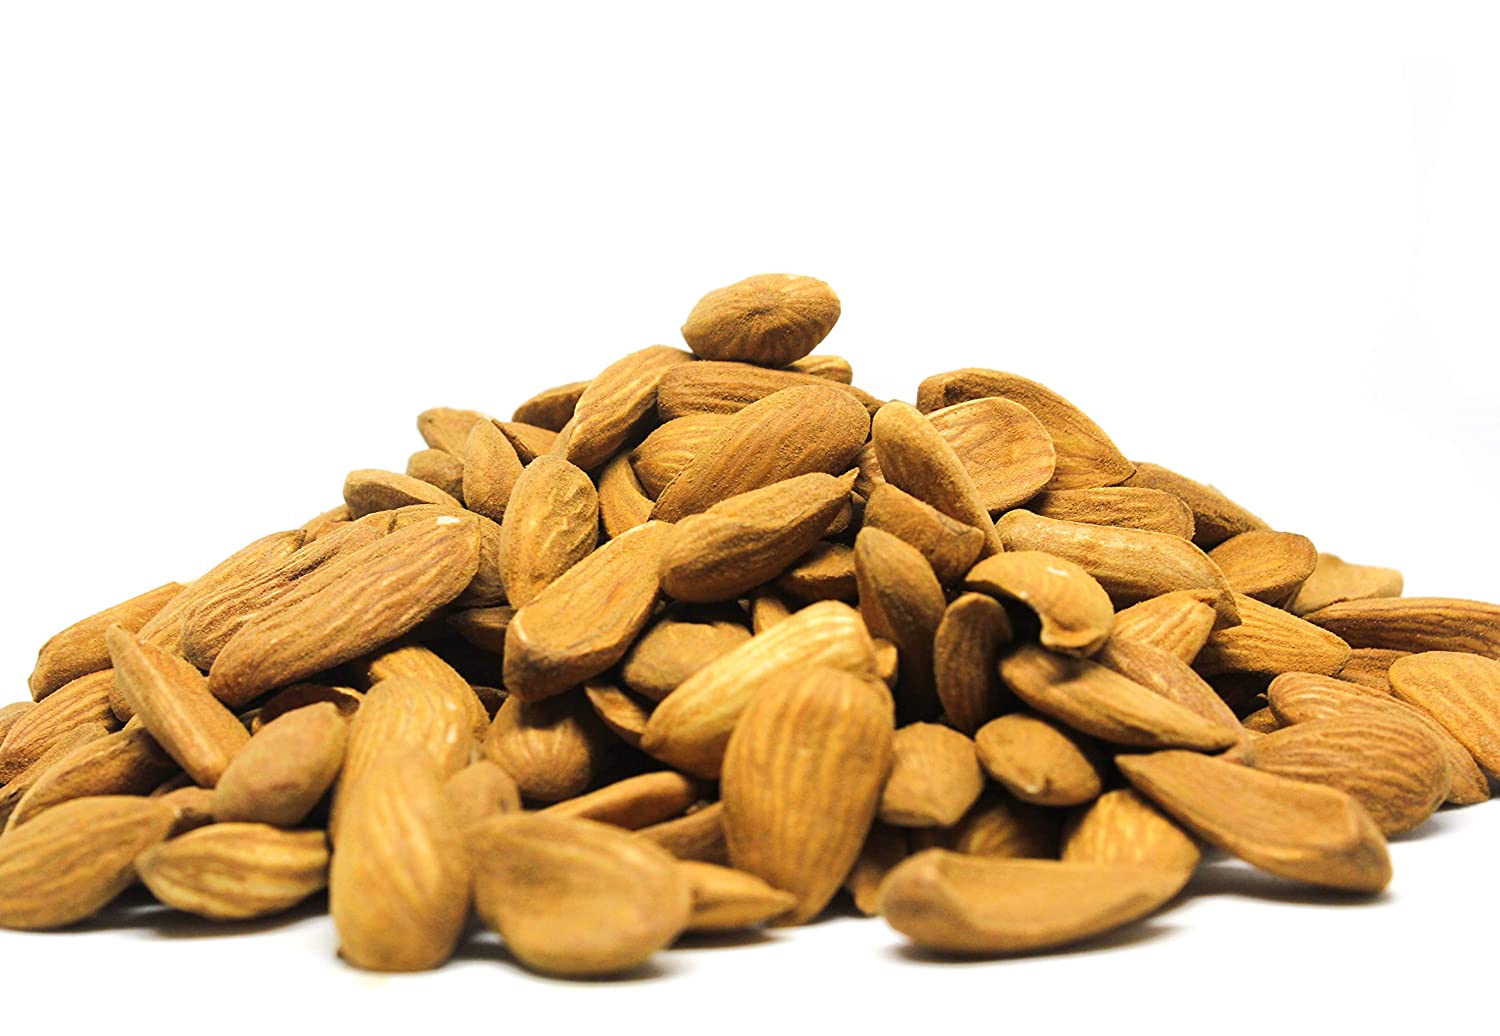  Exporter of first-class midwifery almonds in Iran